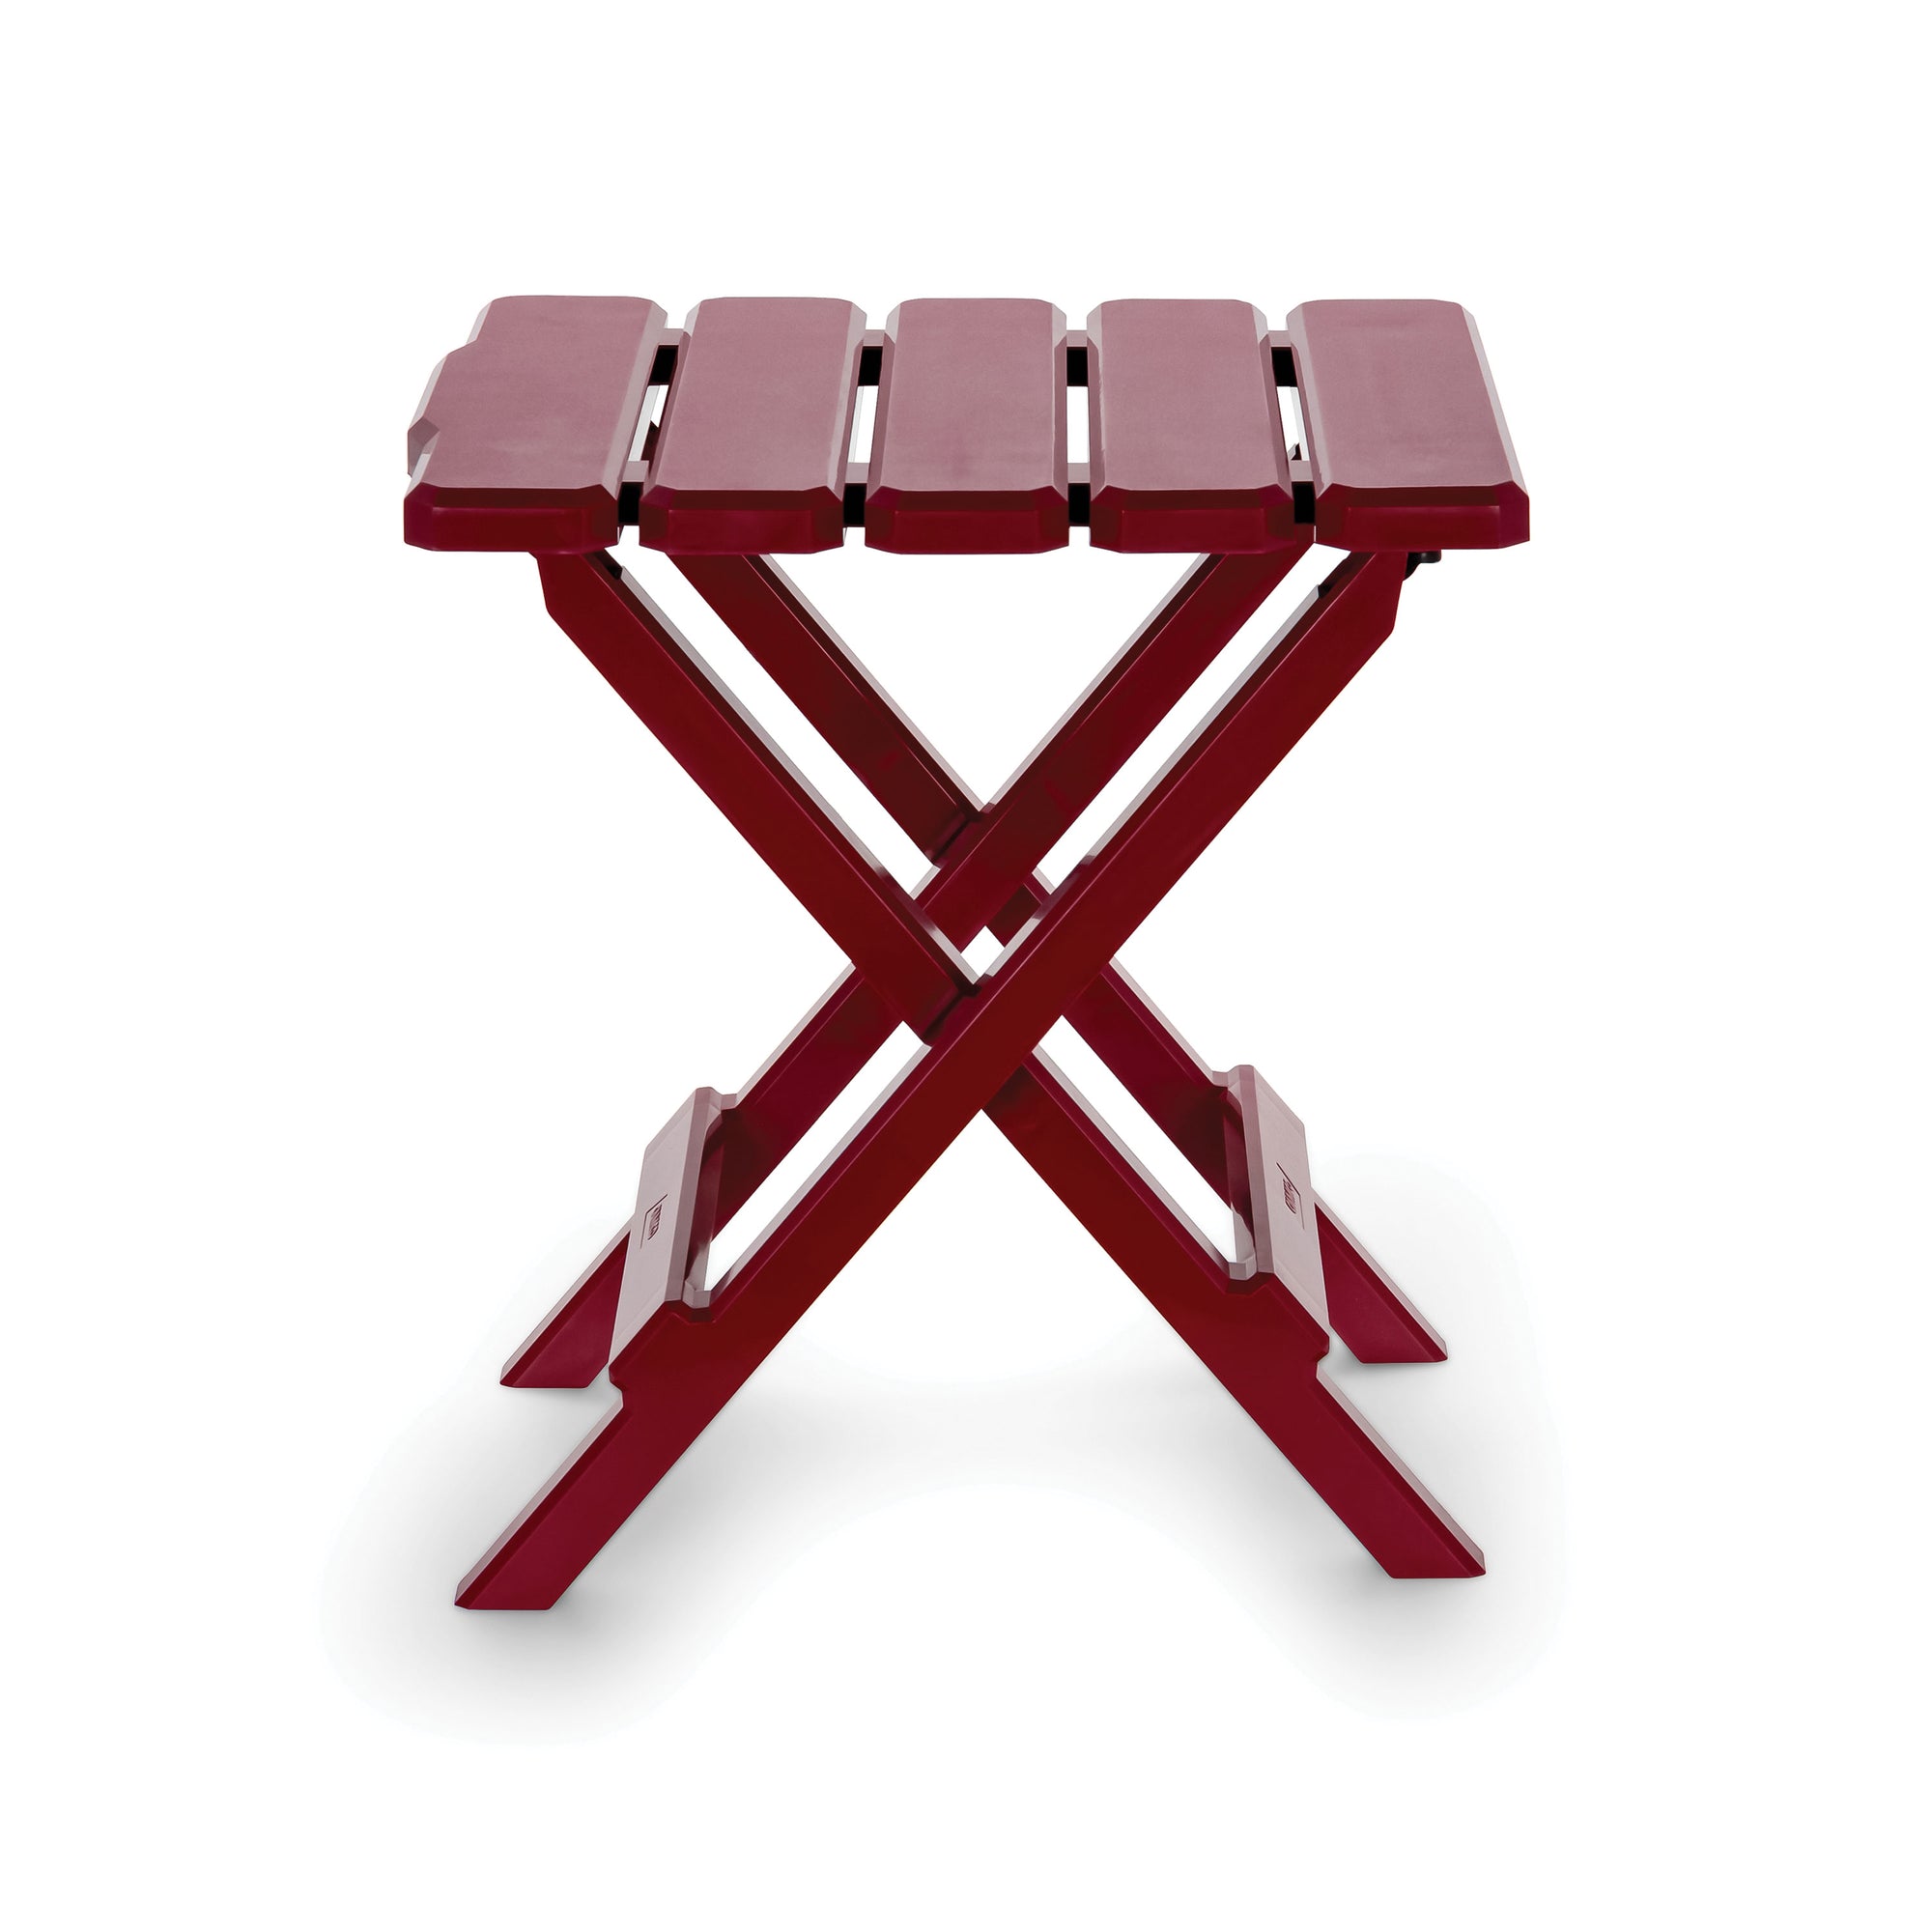 Camco 51684 Adirondack Folding Table Small - Red